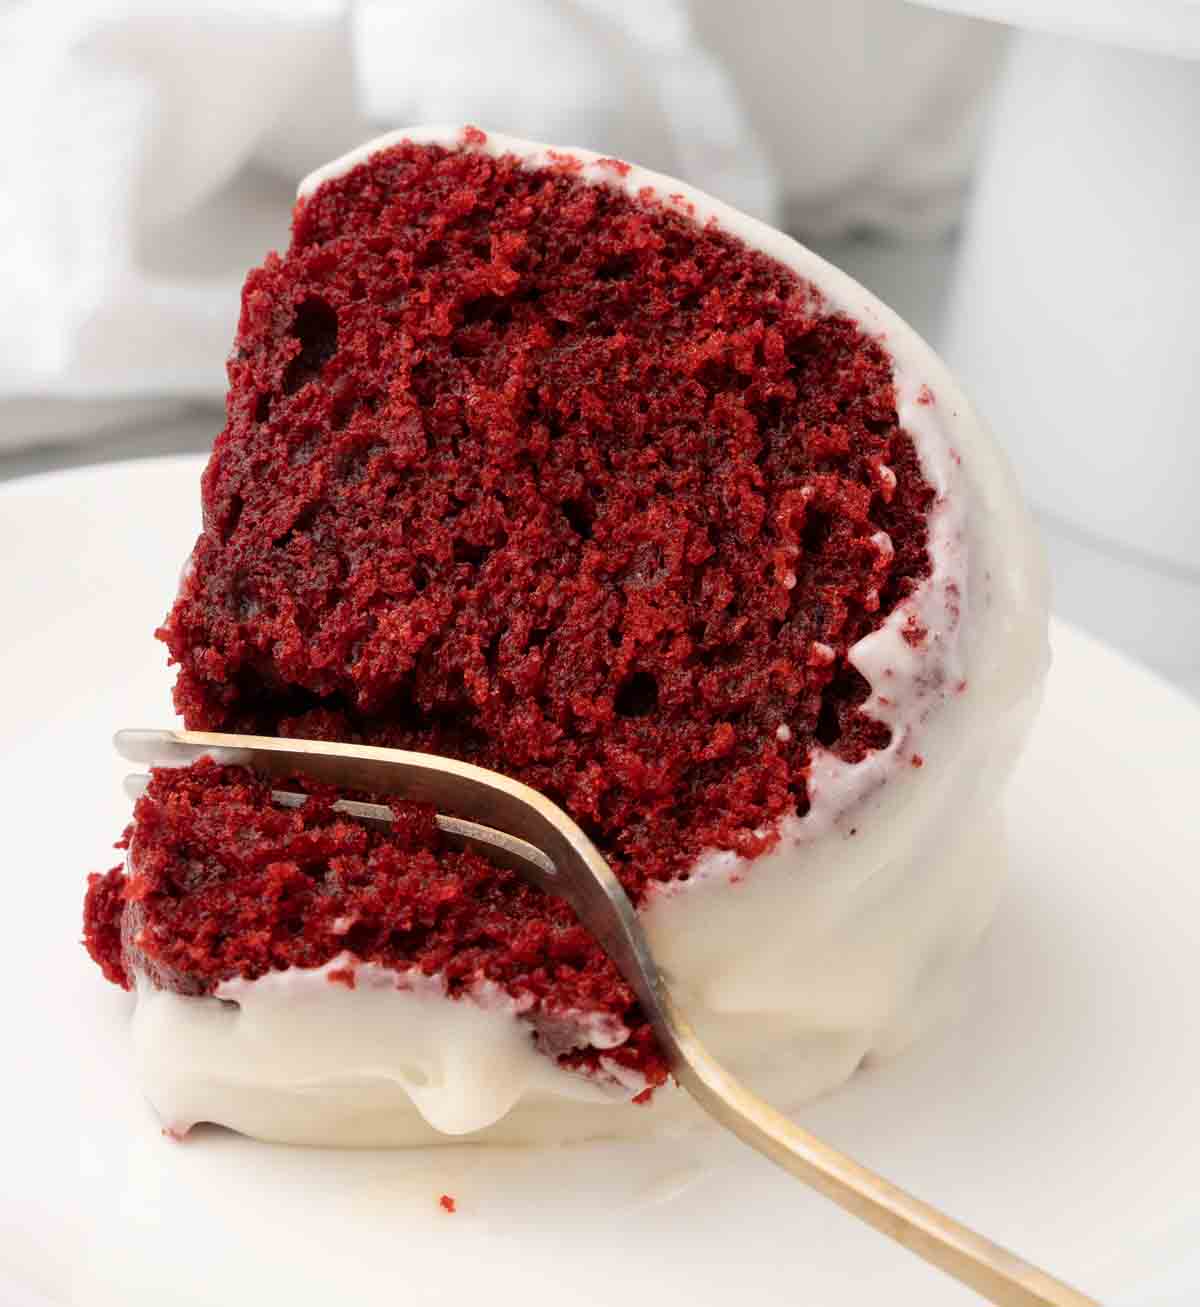 Slice of red velvet cake on a white plate with a fork taking a piece out.